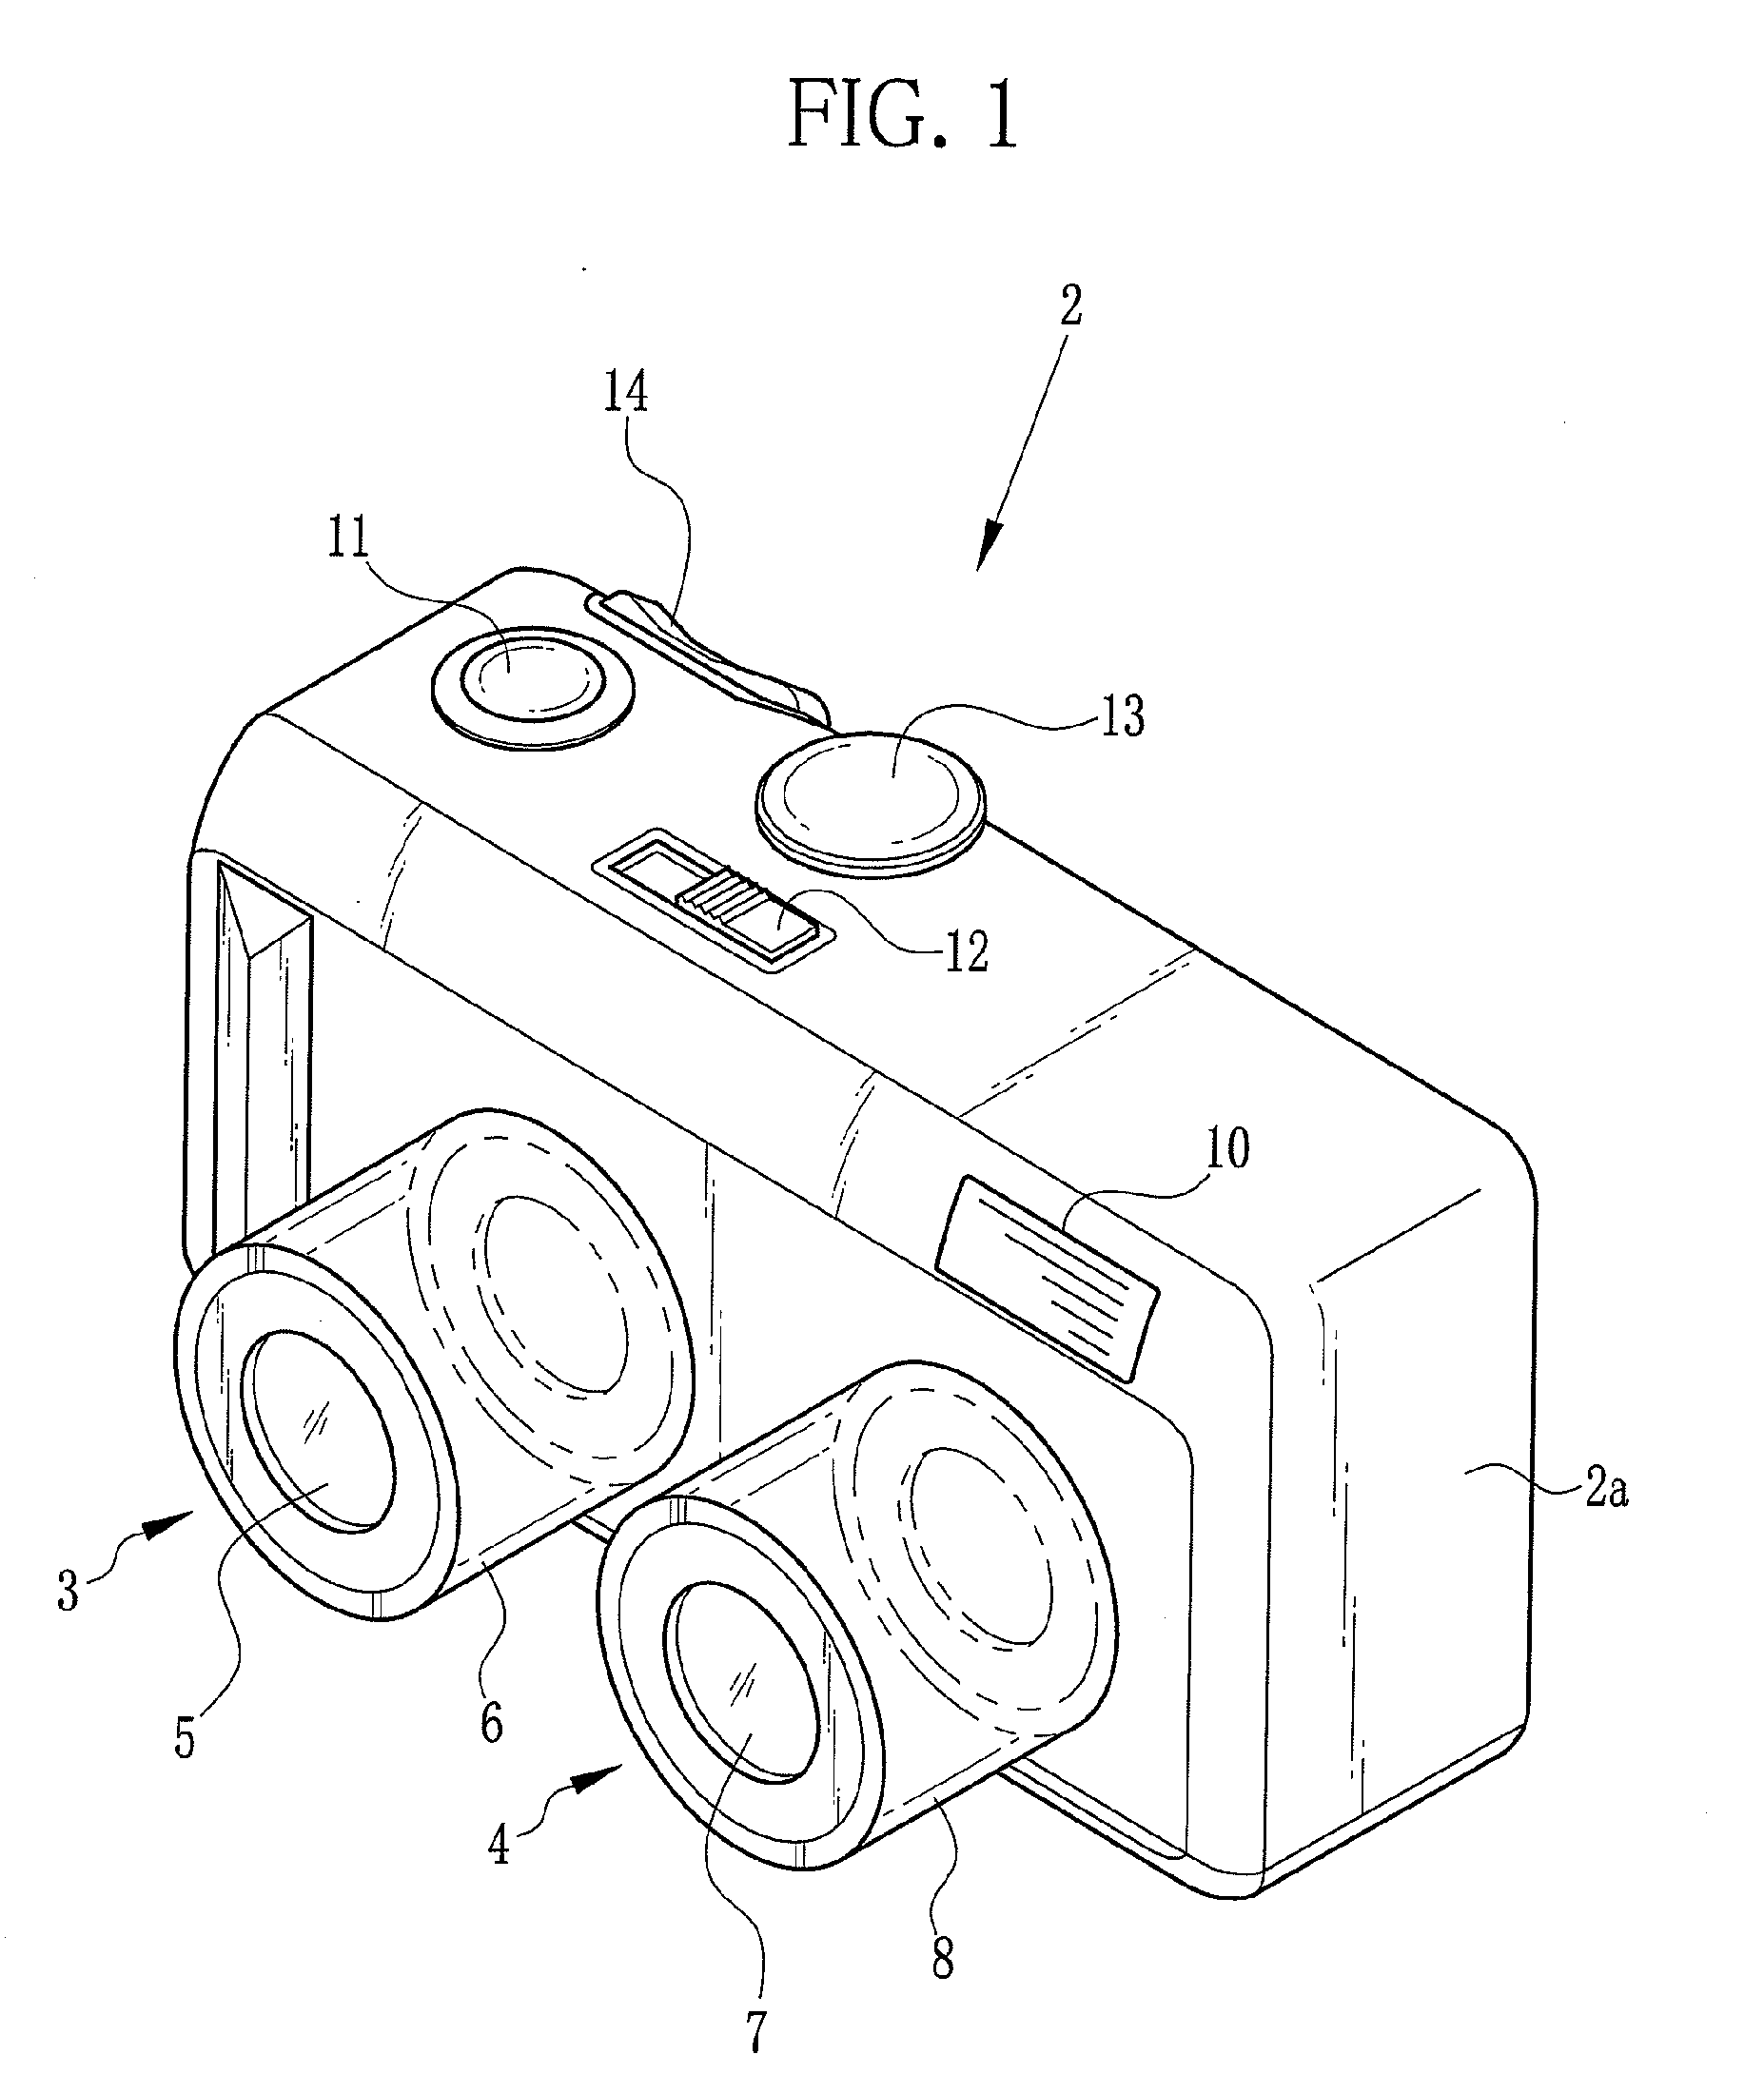 Multi-eye camera and method for distinguishing three-dimensional object